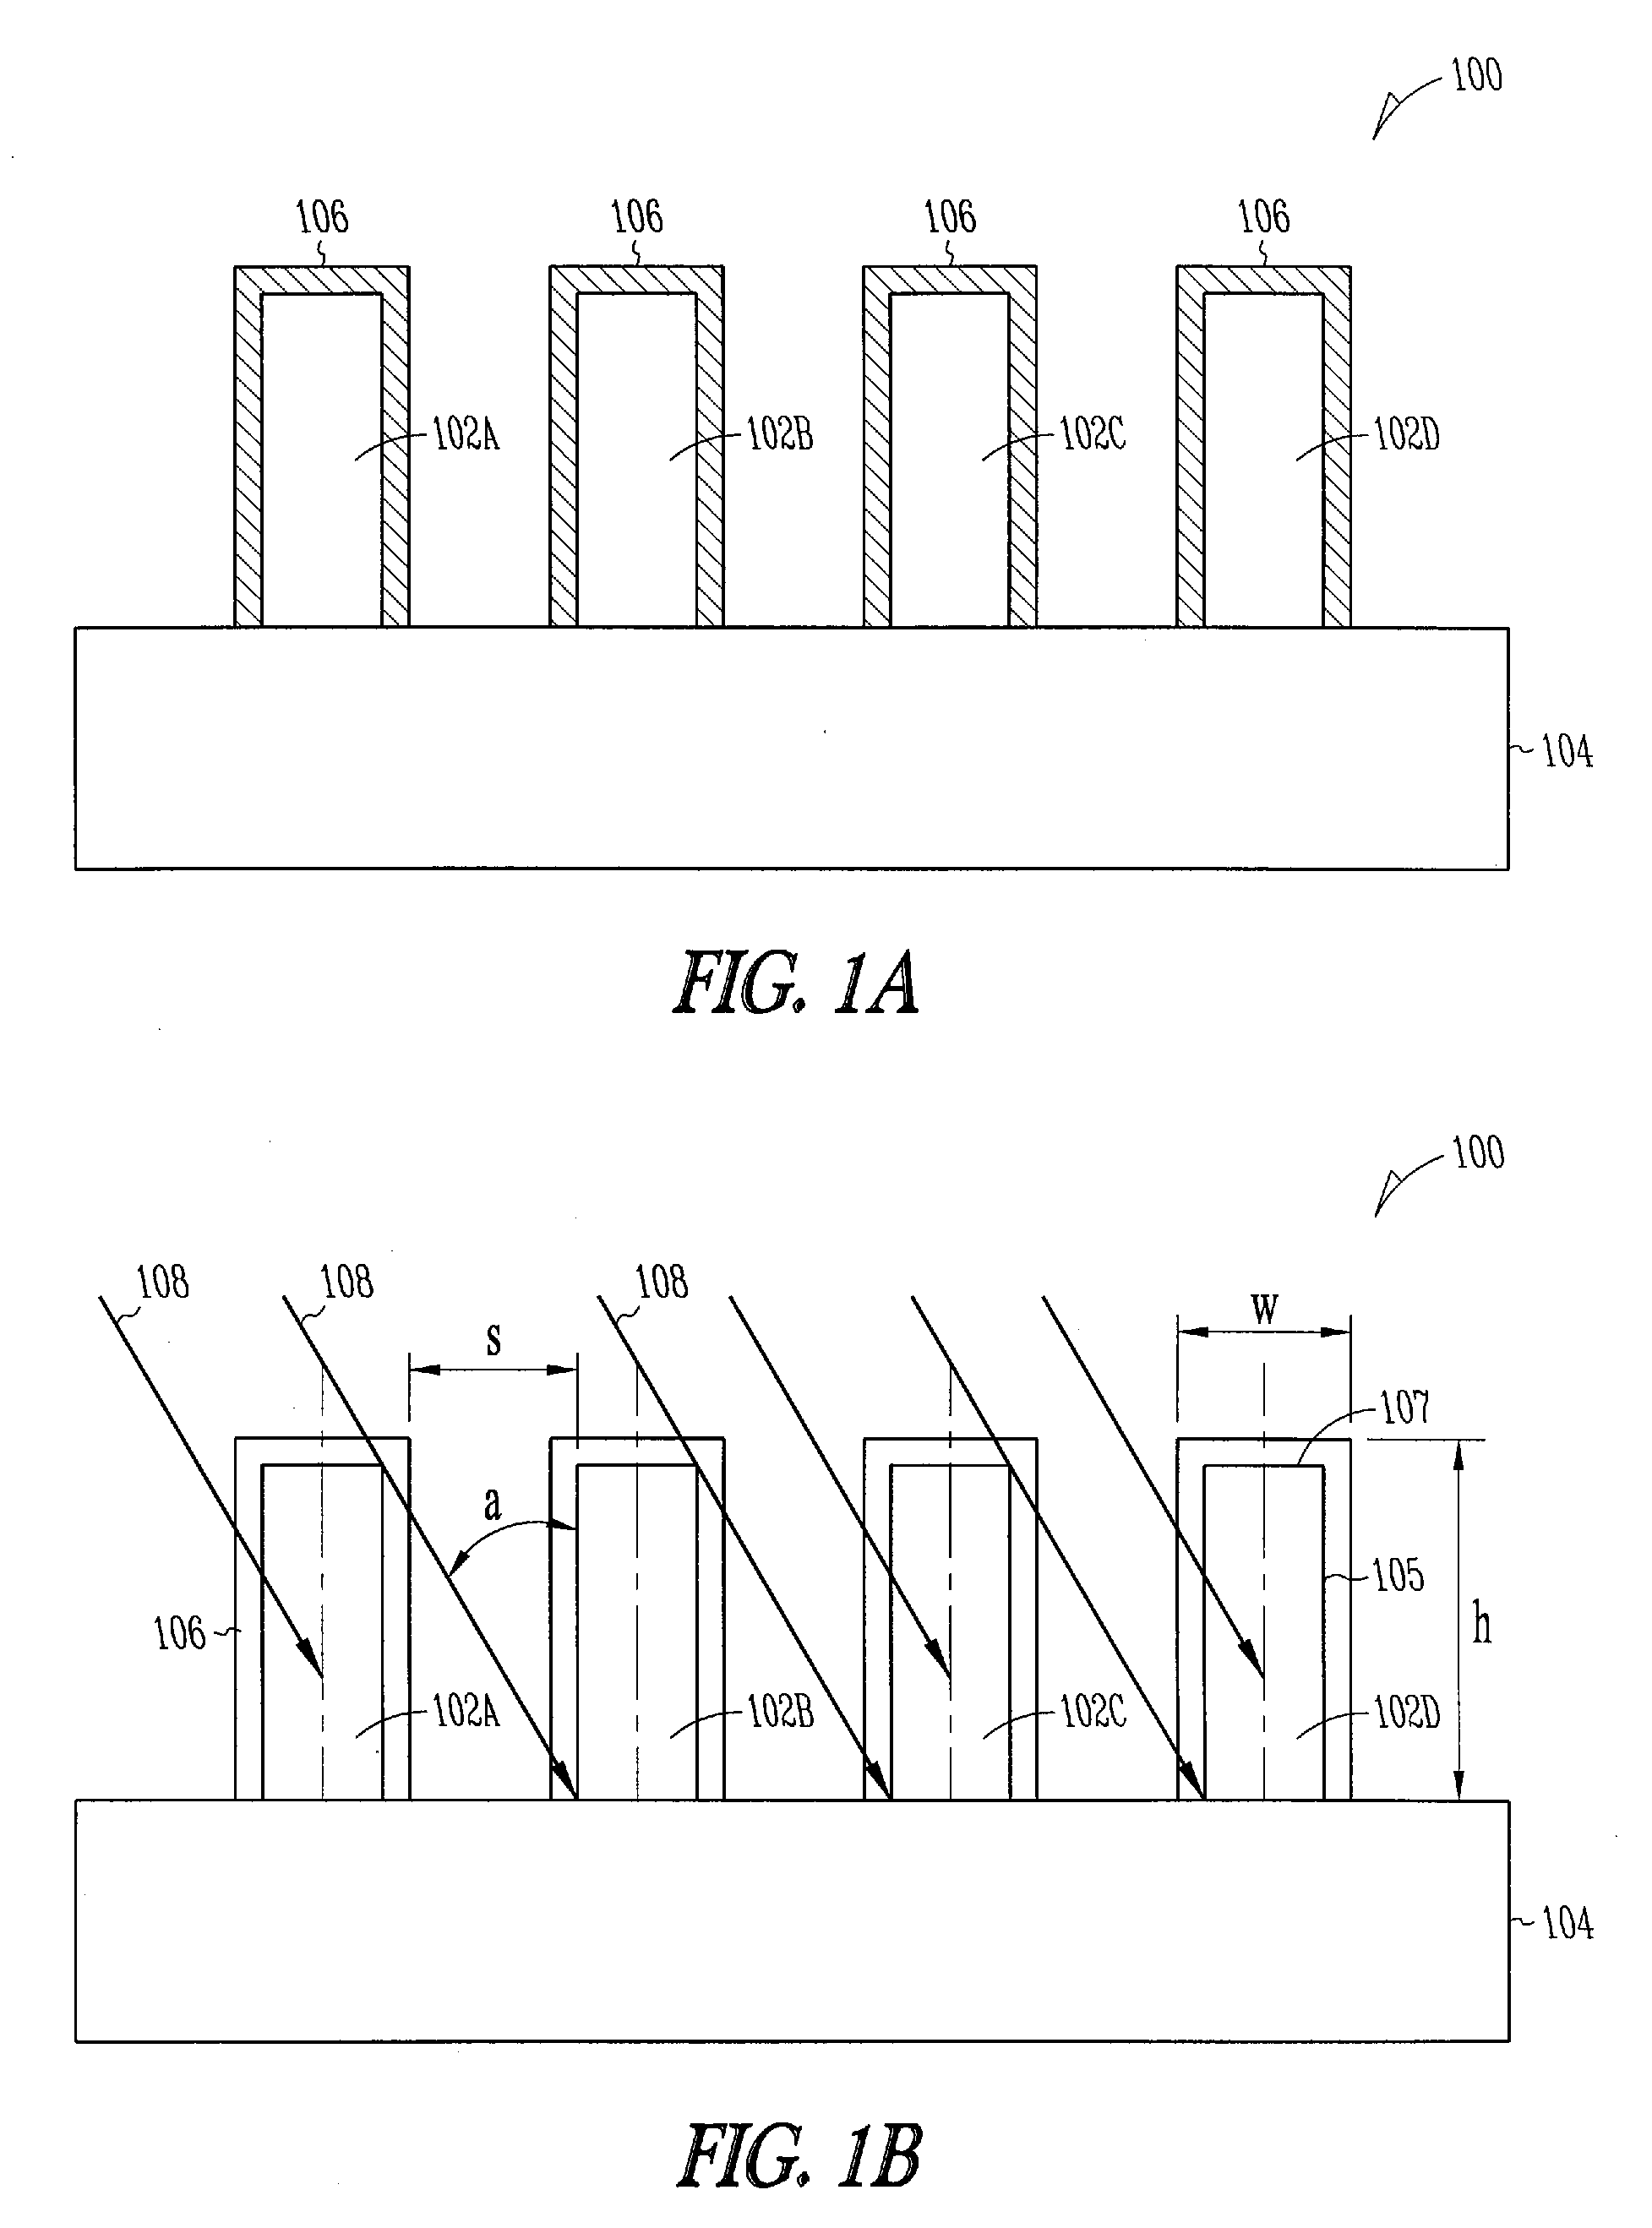 Method and apparatus for reducing flicker noise in a semiconductor device